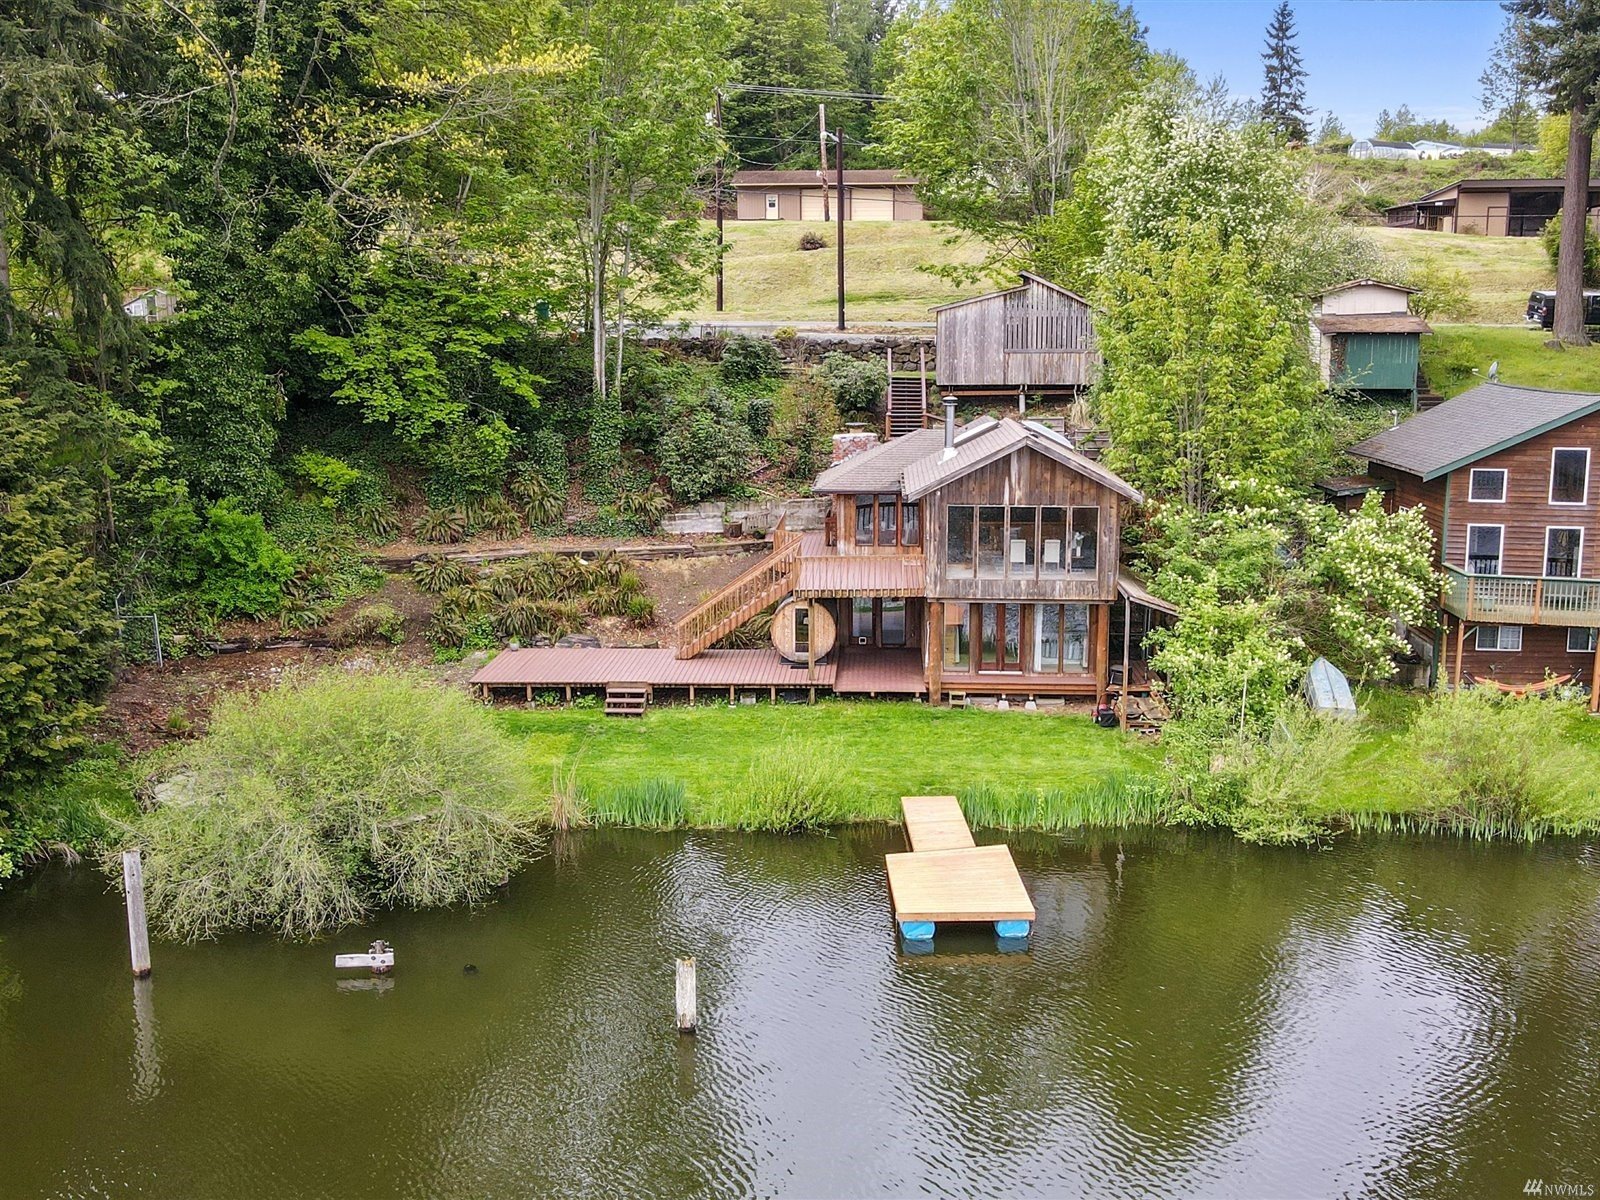 An aerial view of the Martha Lake home from the lake